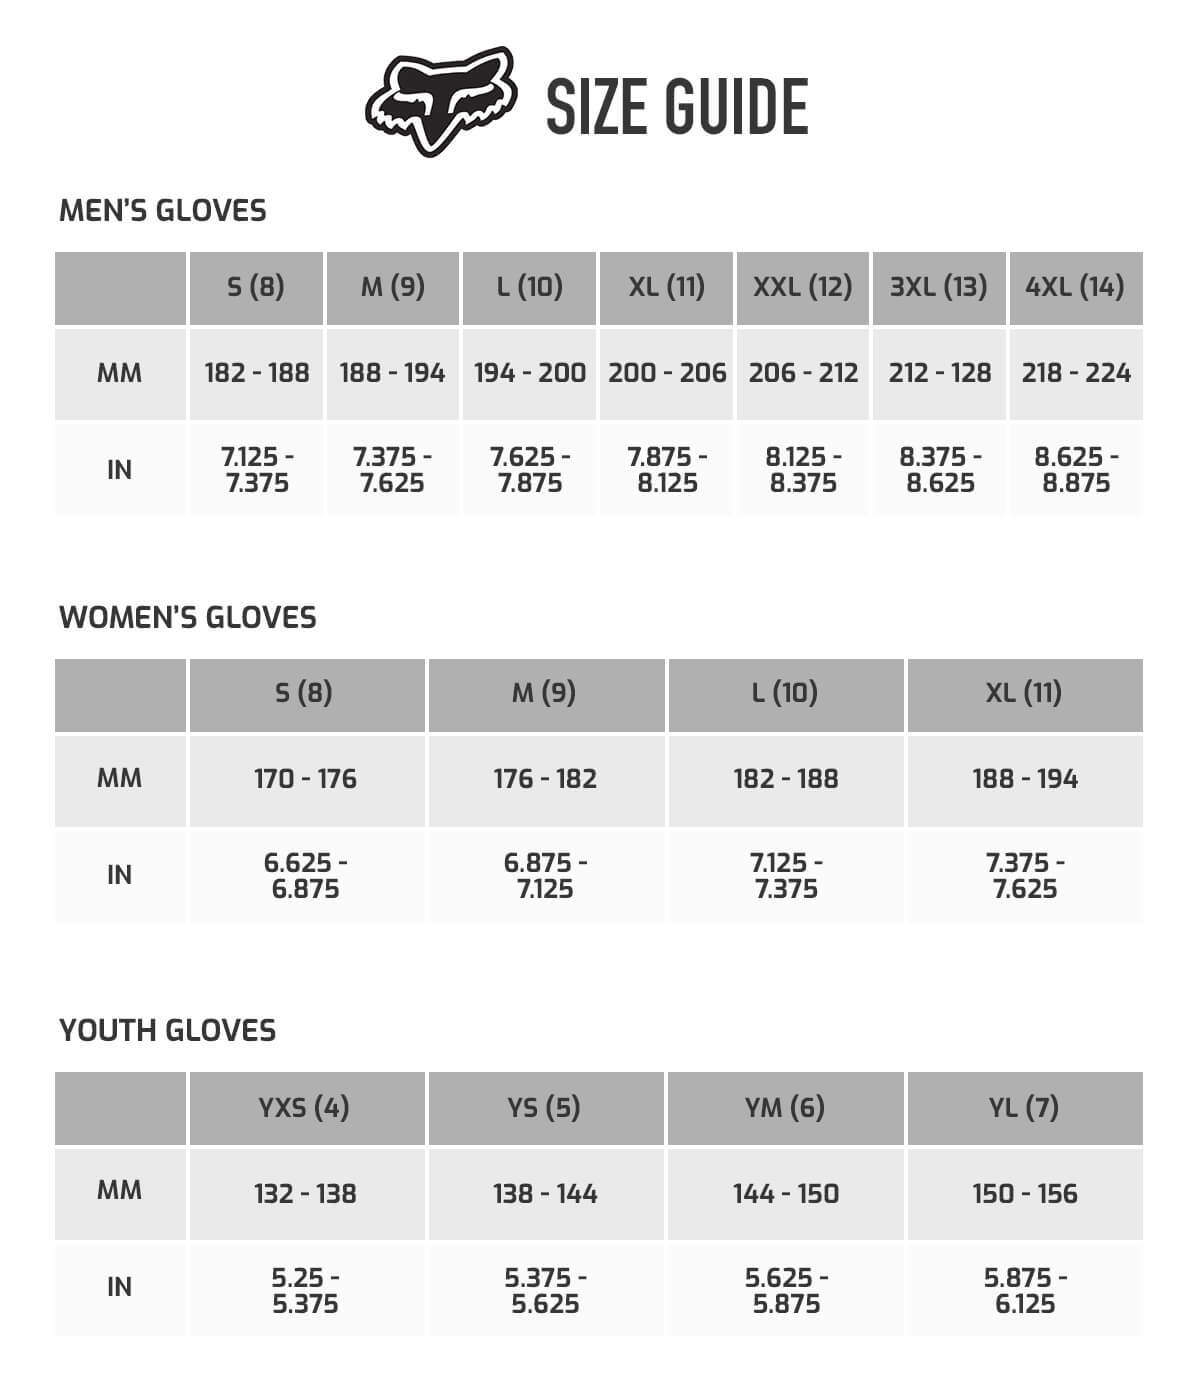 Fox Gloves Sizing Chart Images Gloves and Descriptions